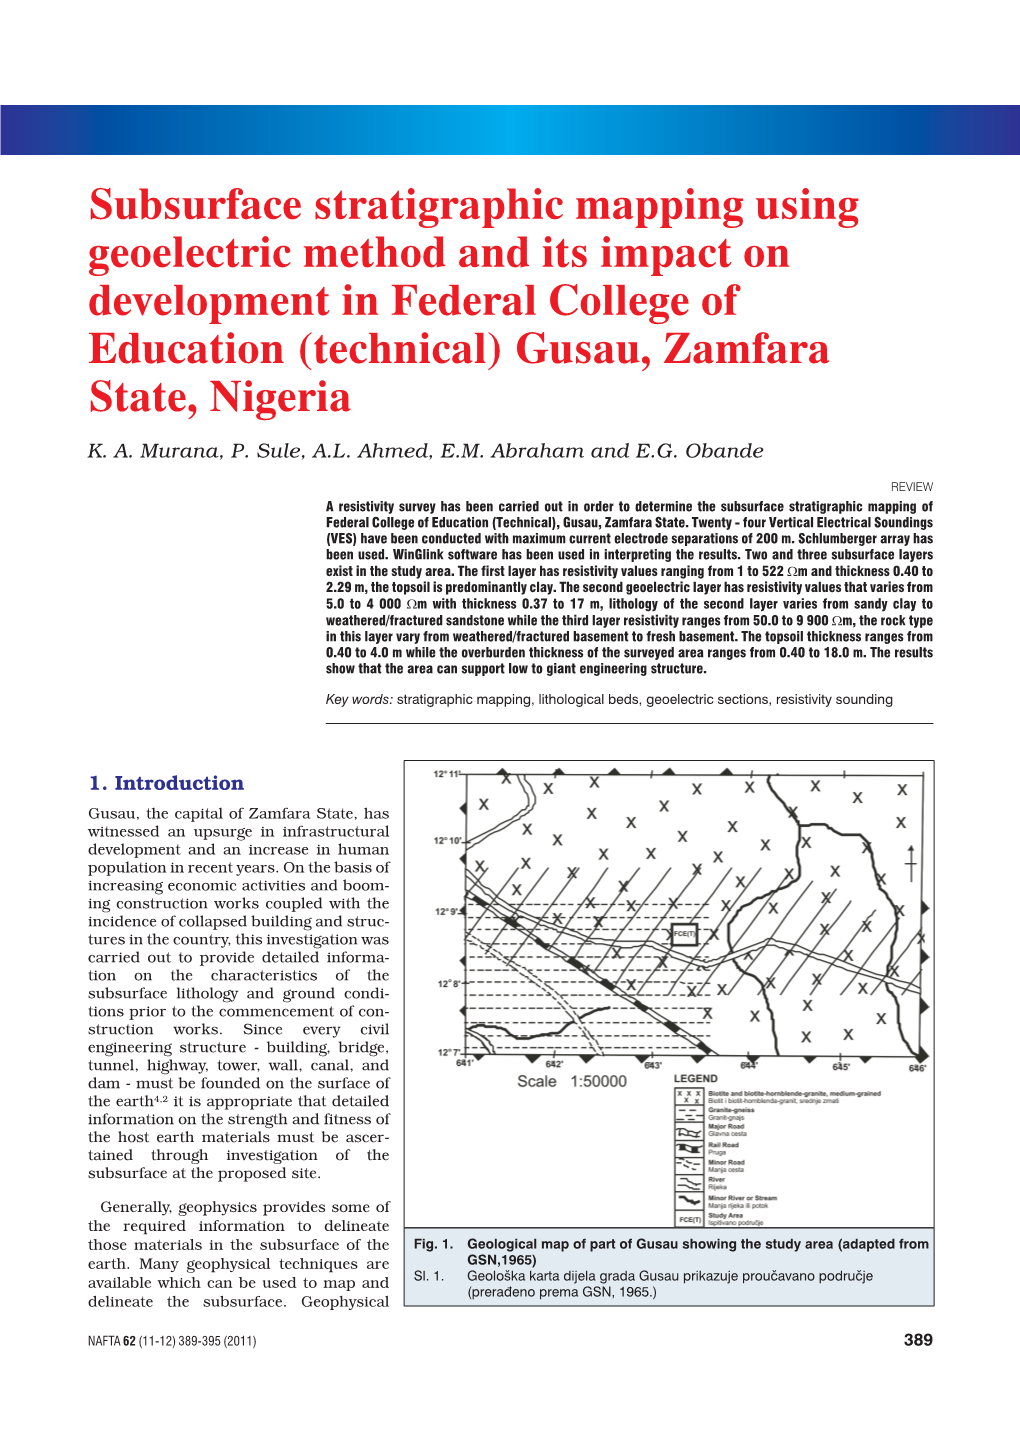 Subsurface Stratigraphic Mapping Using Geoelectric Method and Its Impact on Development in Federal College of Education (Technical) Gusau, Zamfara State, Nigeria K